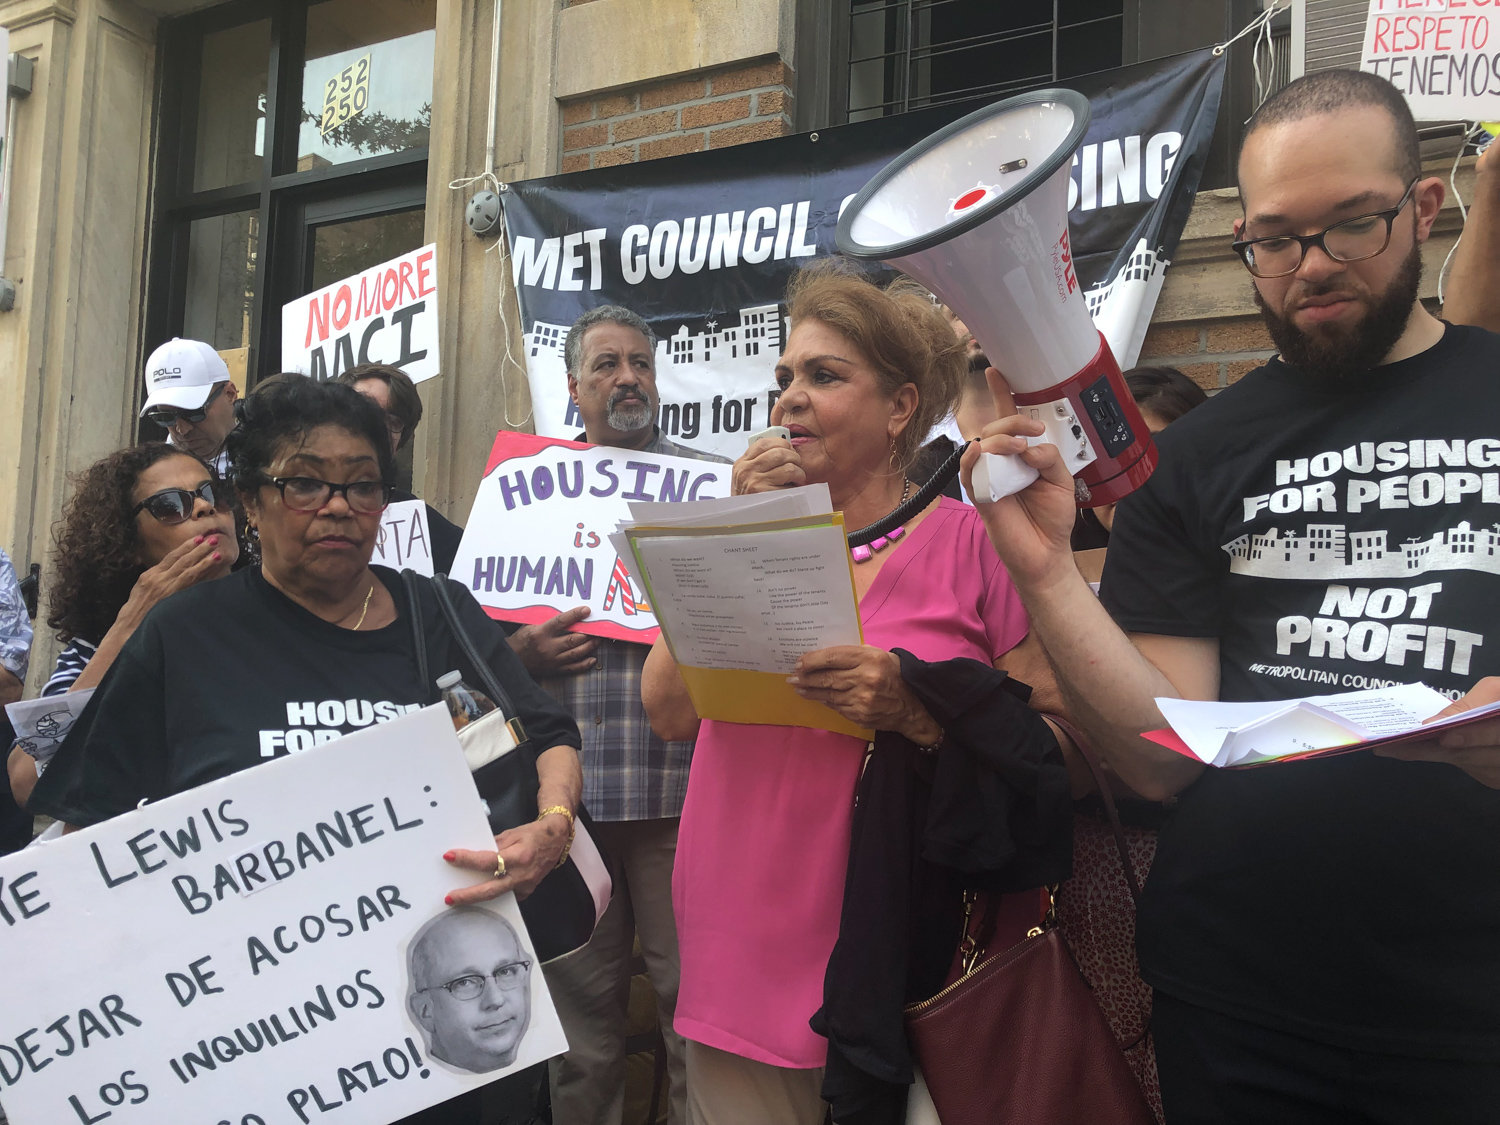 There are a number of actions beleaguered tenants can take to fight for better conditions, according to Met Council on Housing executive director Ava Farkas. Among them are taking their landlord to court, not paying rent, and arguing for rent reductions.